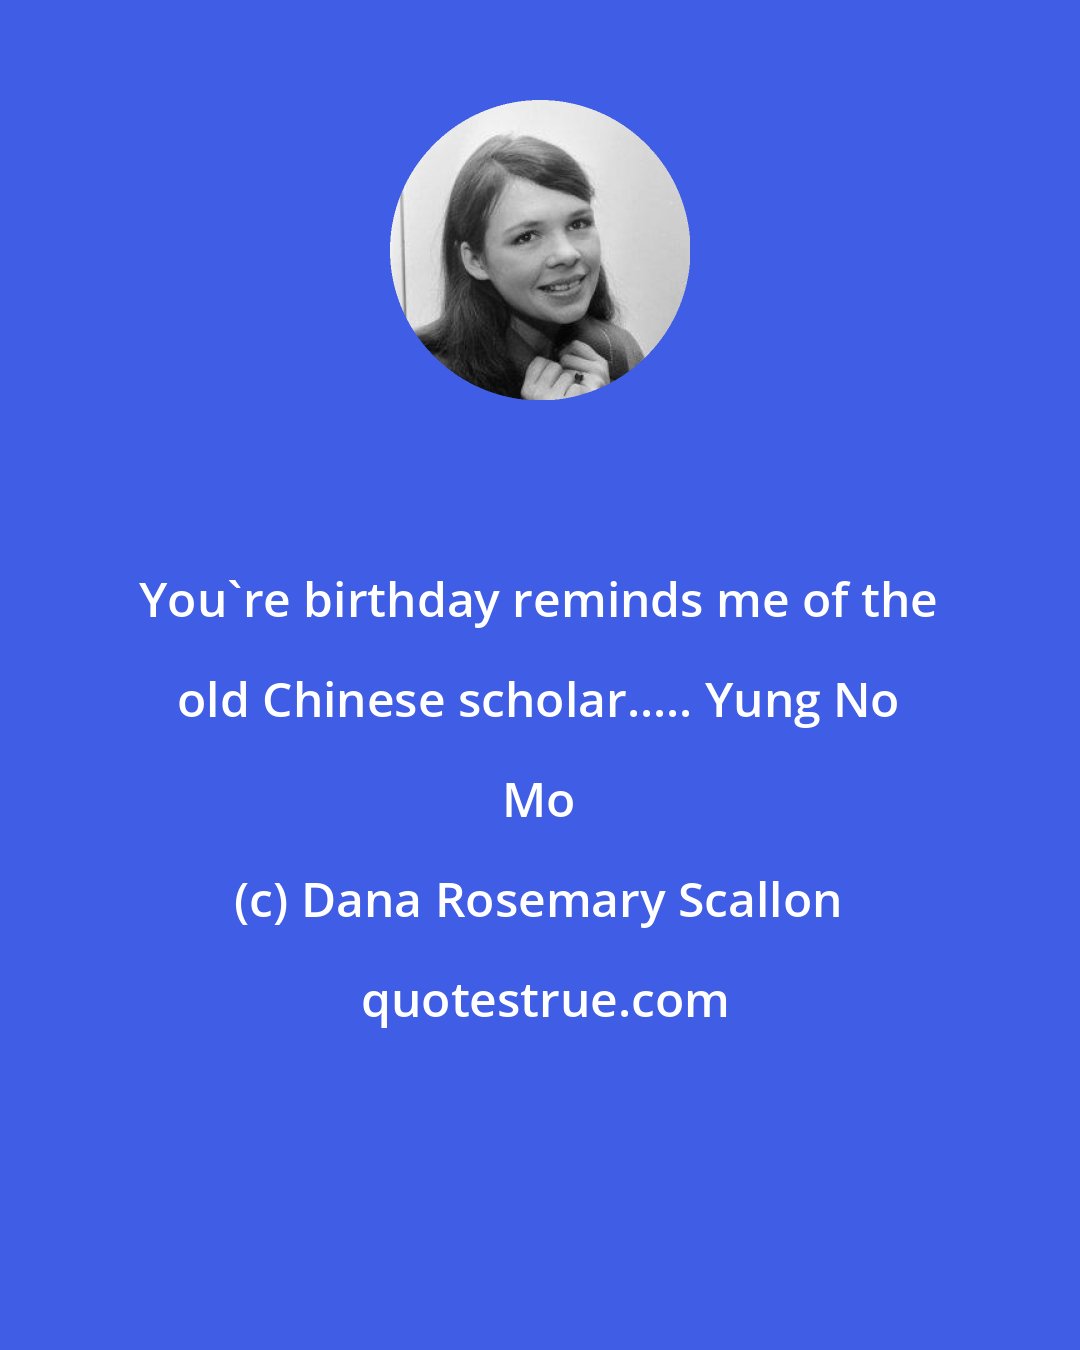 Dana Rosemary Scallon: You're birthday reminds me of the old Chinese scholar..... Yung No Mo